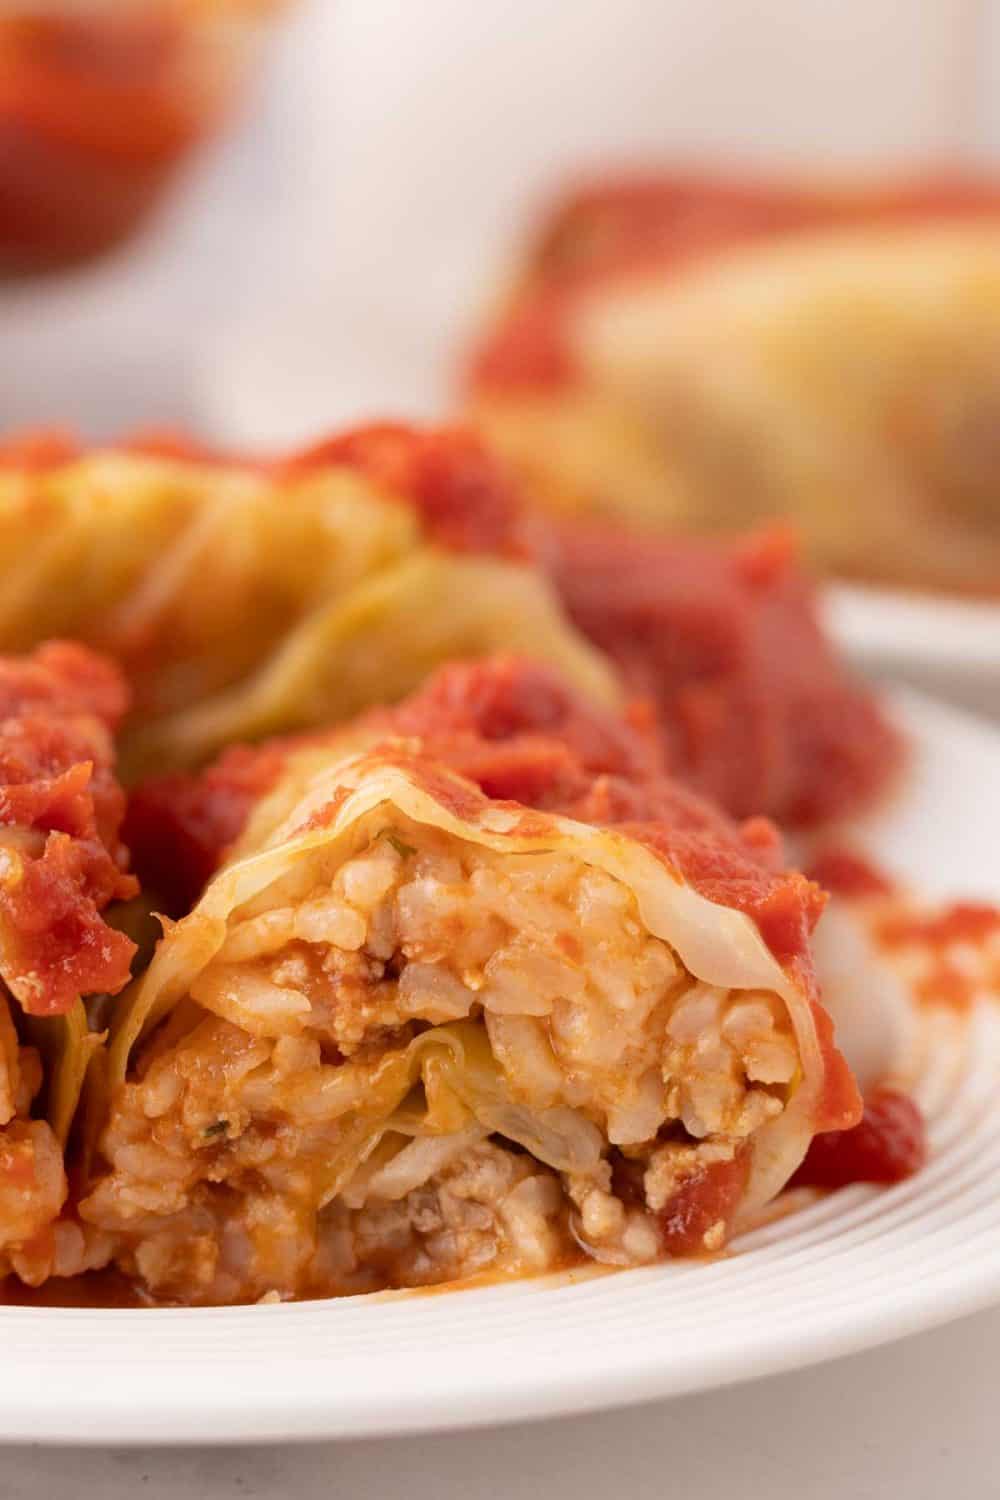 cooked cabbage rolls smothered in red sauce on a round plate sliced in half.